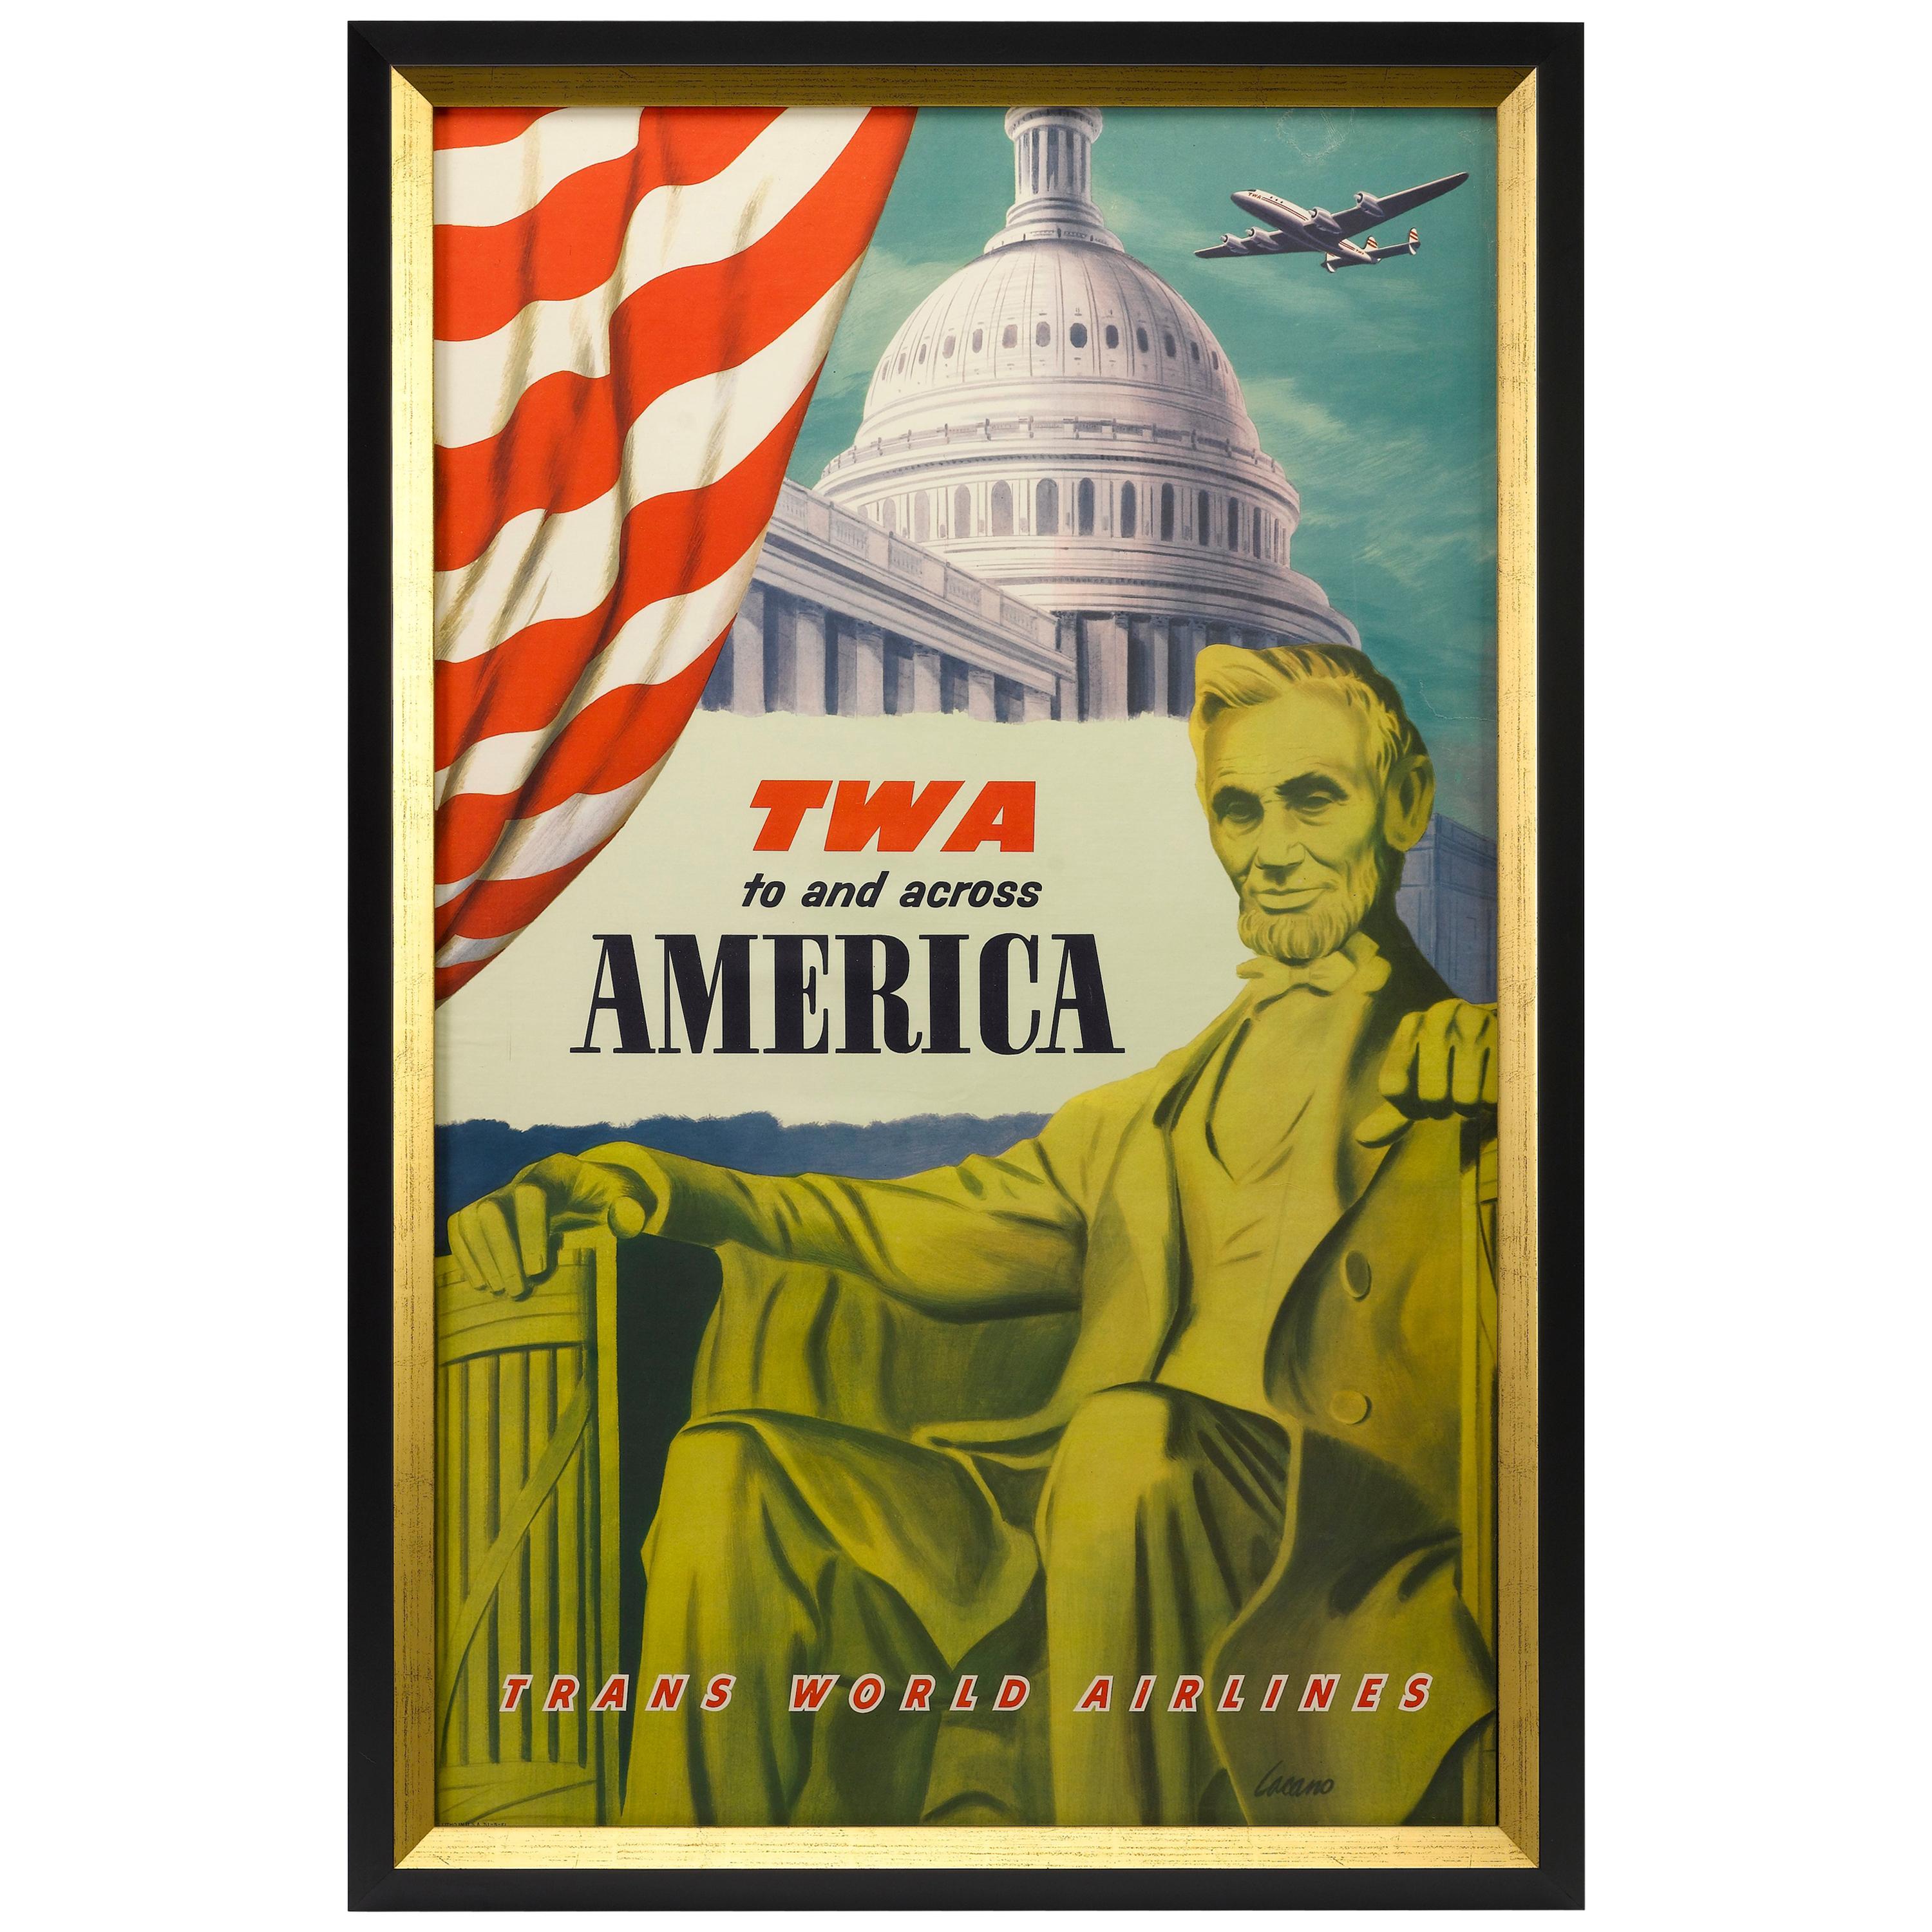 "TWA to and across America" Washington DC Vintage Travel Poster by Frank Lacano